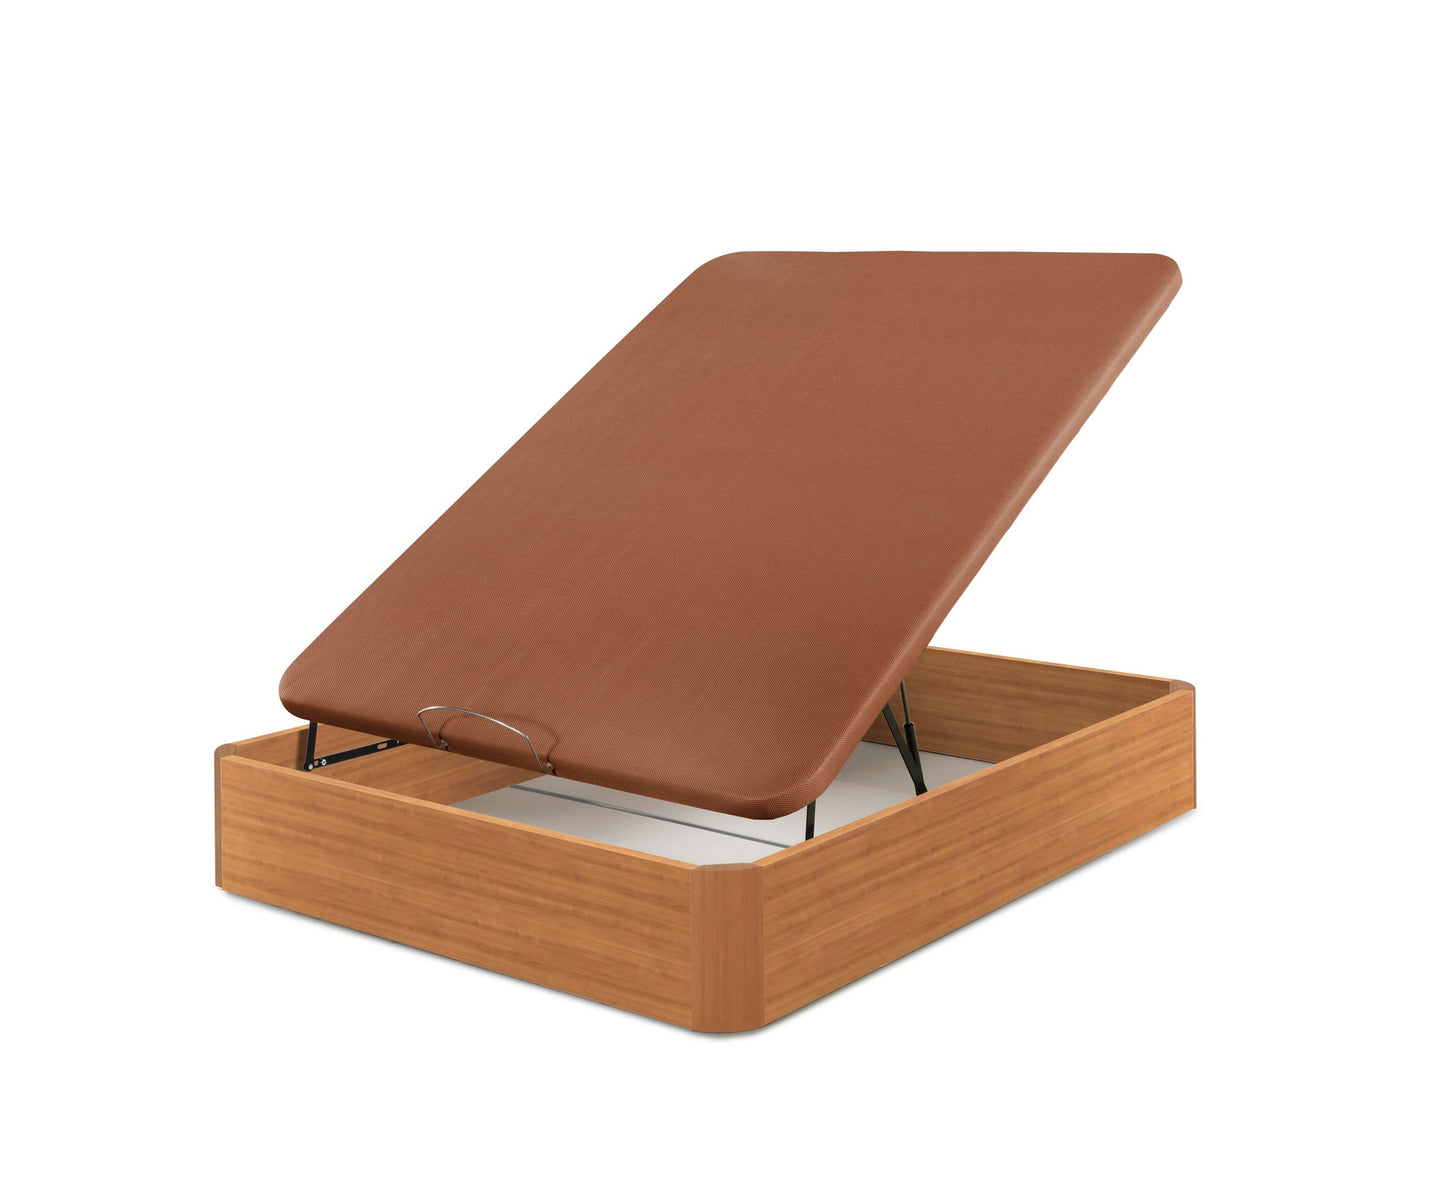 Generation Z Wooden Canapé and Mattress Pack | CHERRY